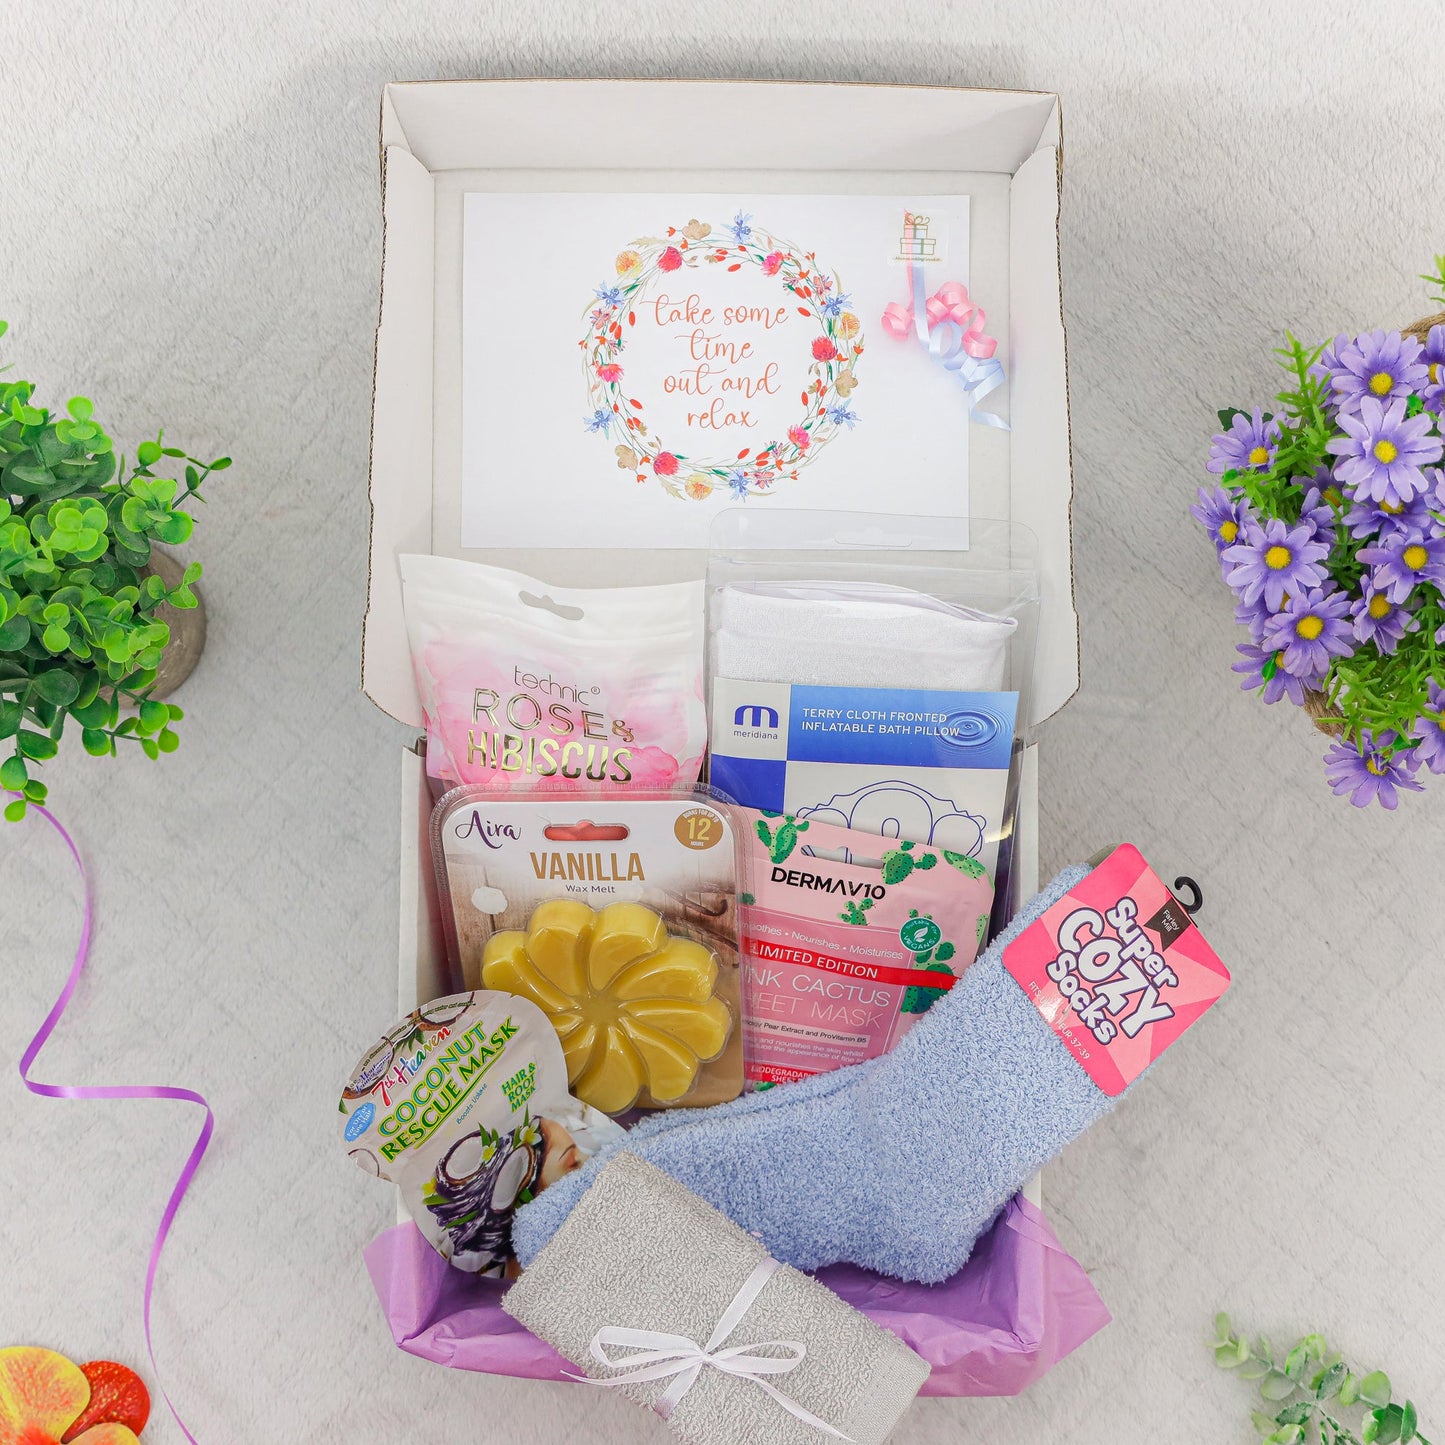 Mother's Day Bath Time Pamper Hamper Gift Box  - Always Looking Good -   